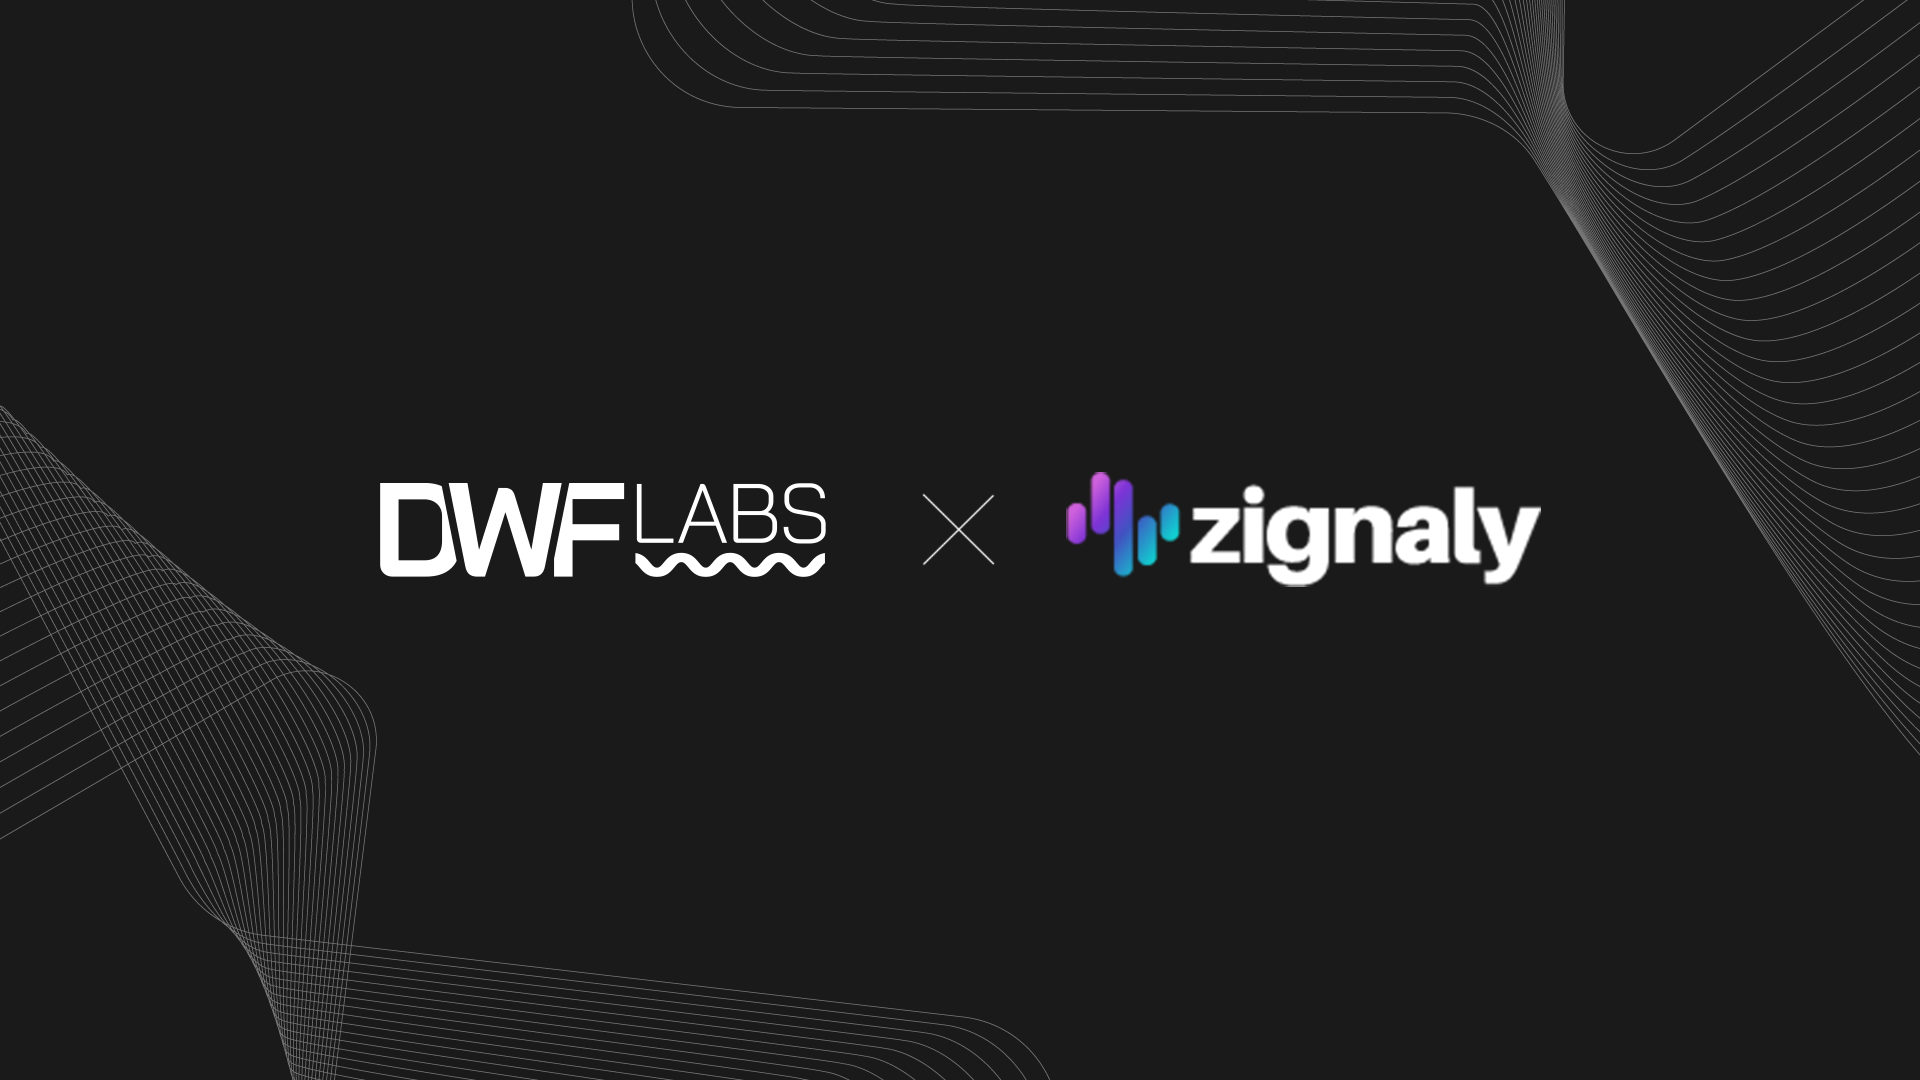 Zignaly Announces Cosmos-Based ZIGChain and $100M Ecosystem Fund Backed by DWF Labs